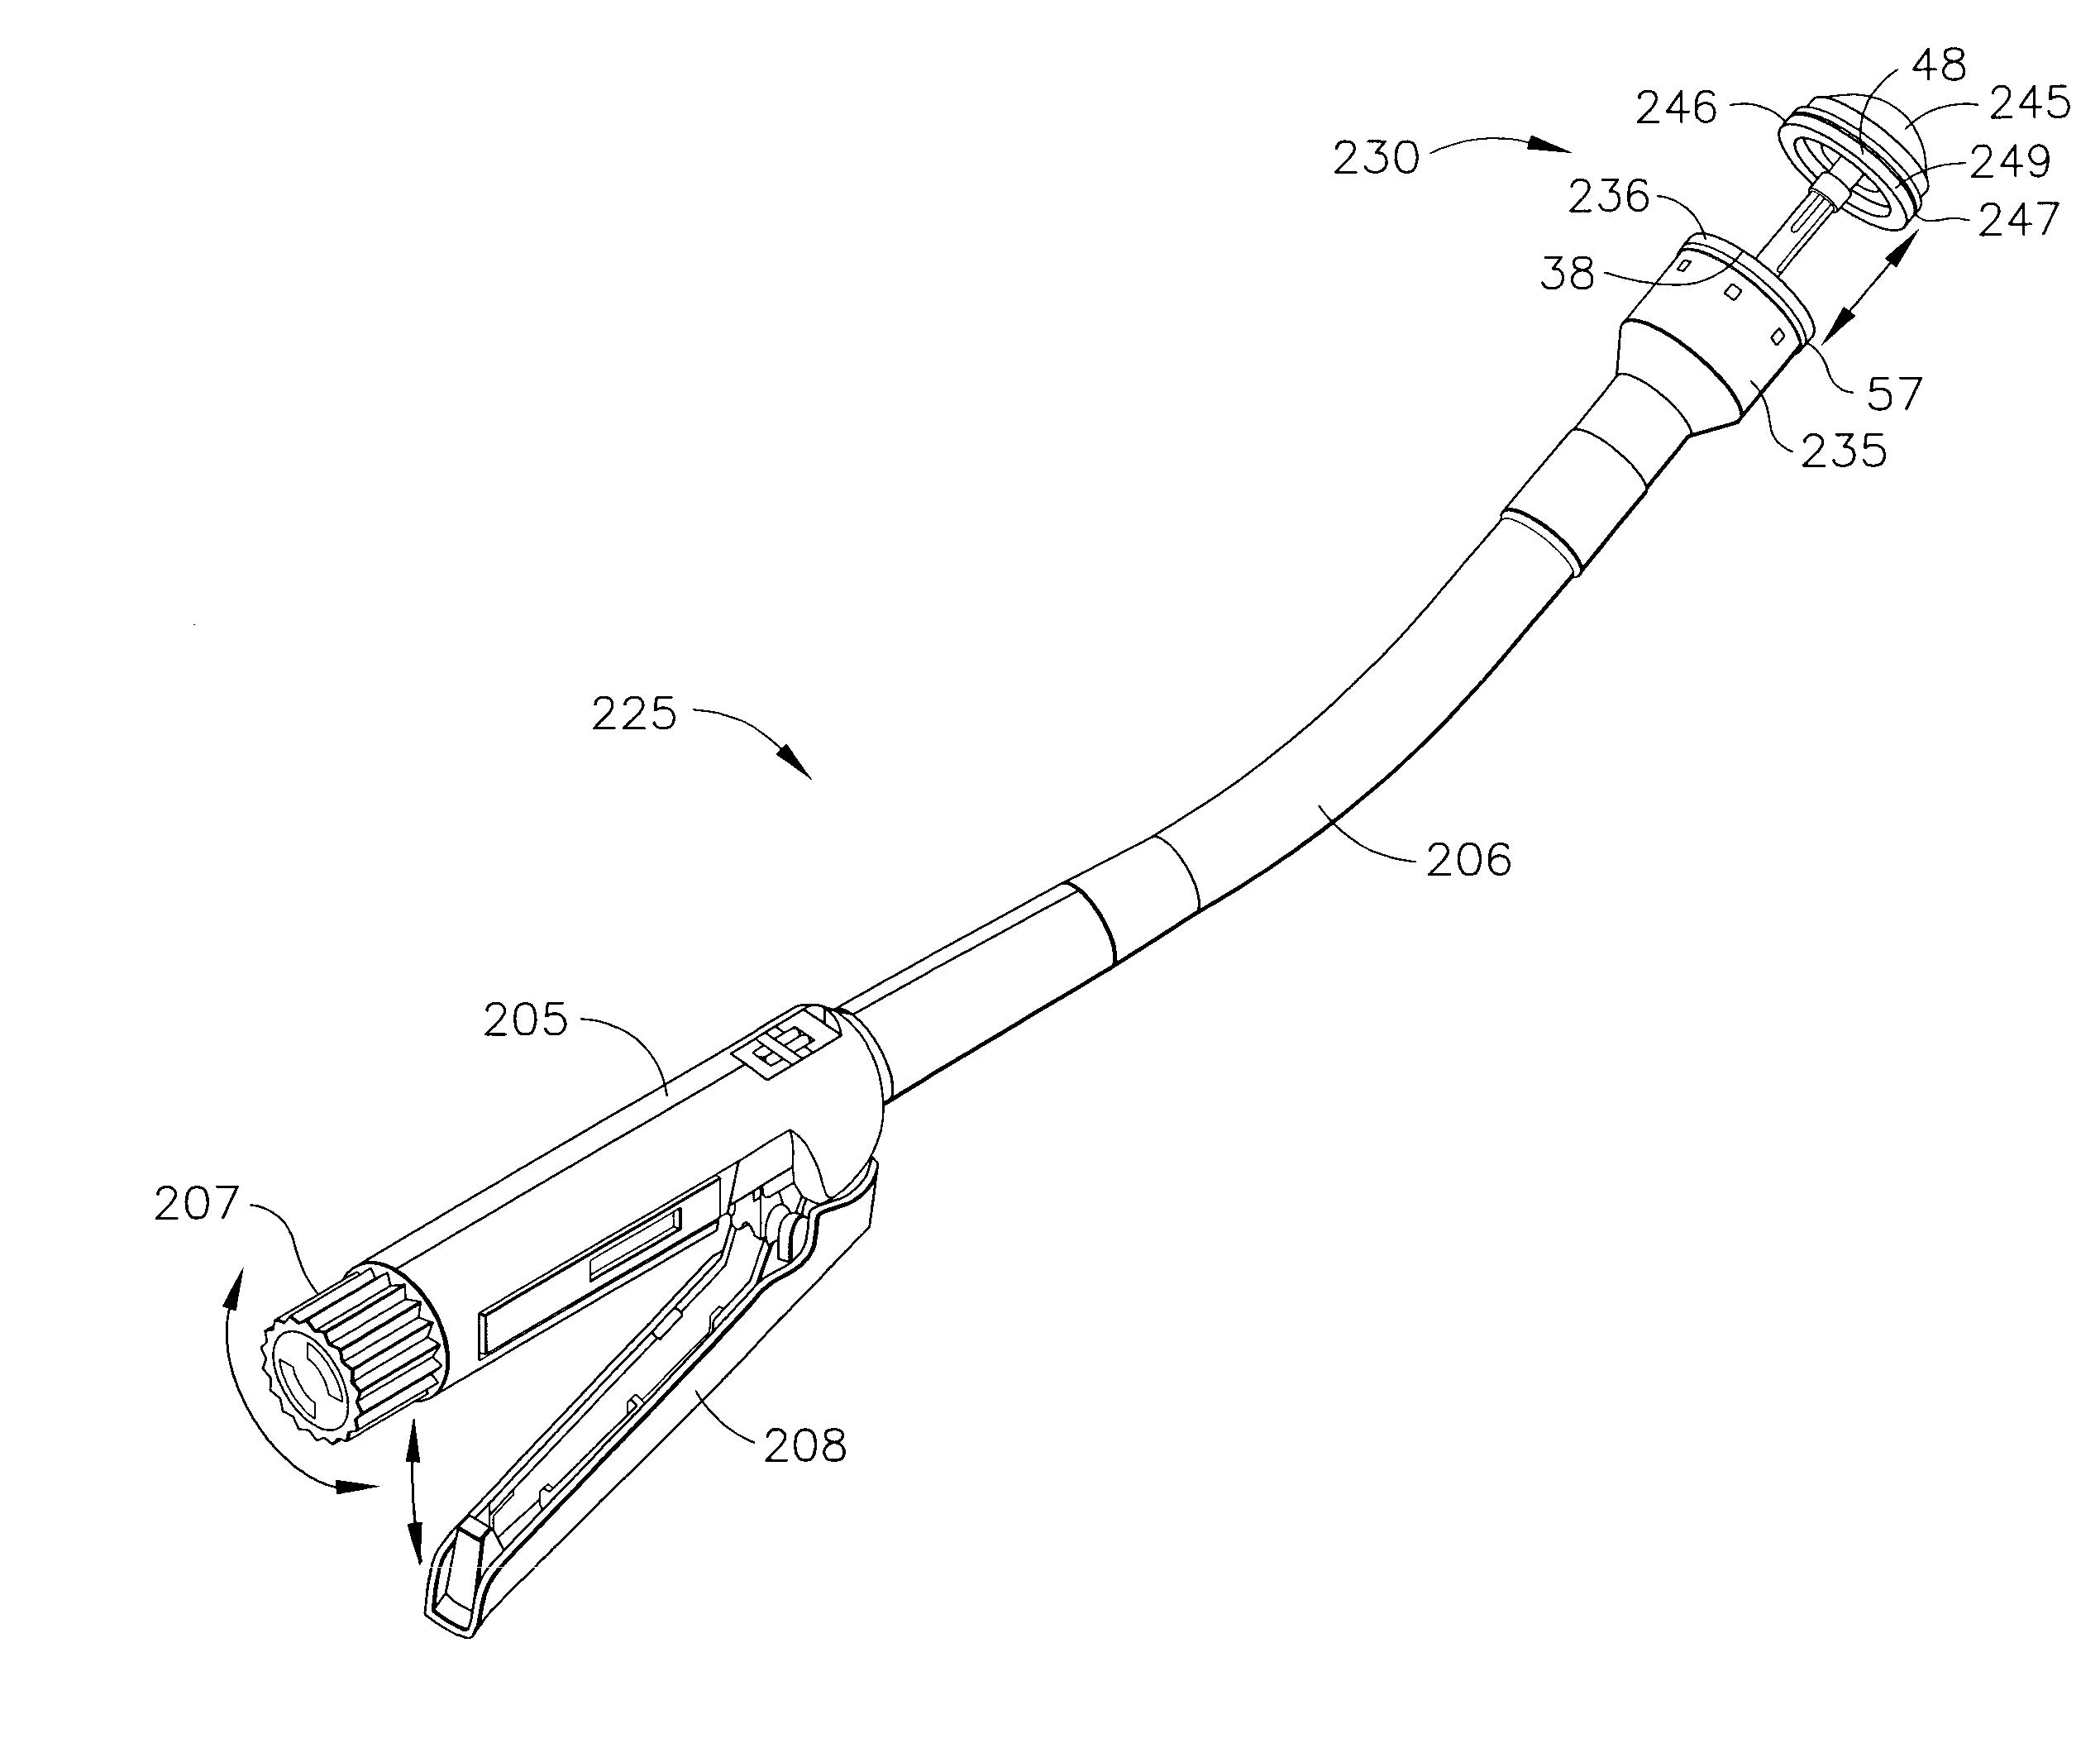 Surgical Fastening Device With Initiator Impregnation of a Matrix or Buttress to Improve Adhesive Application